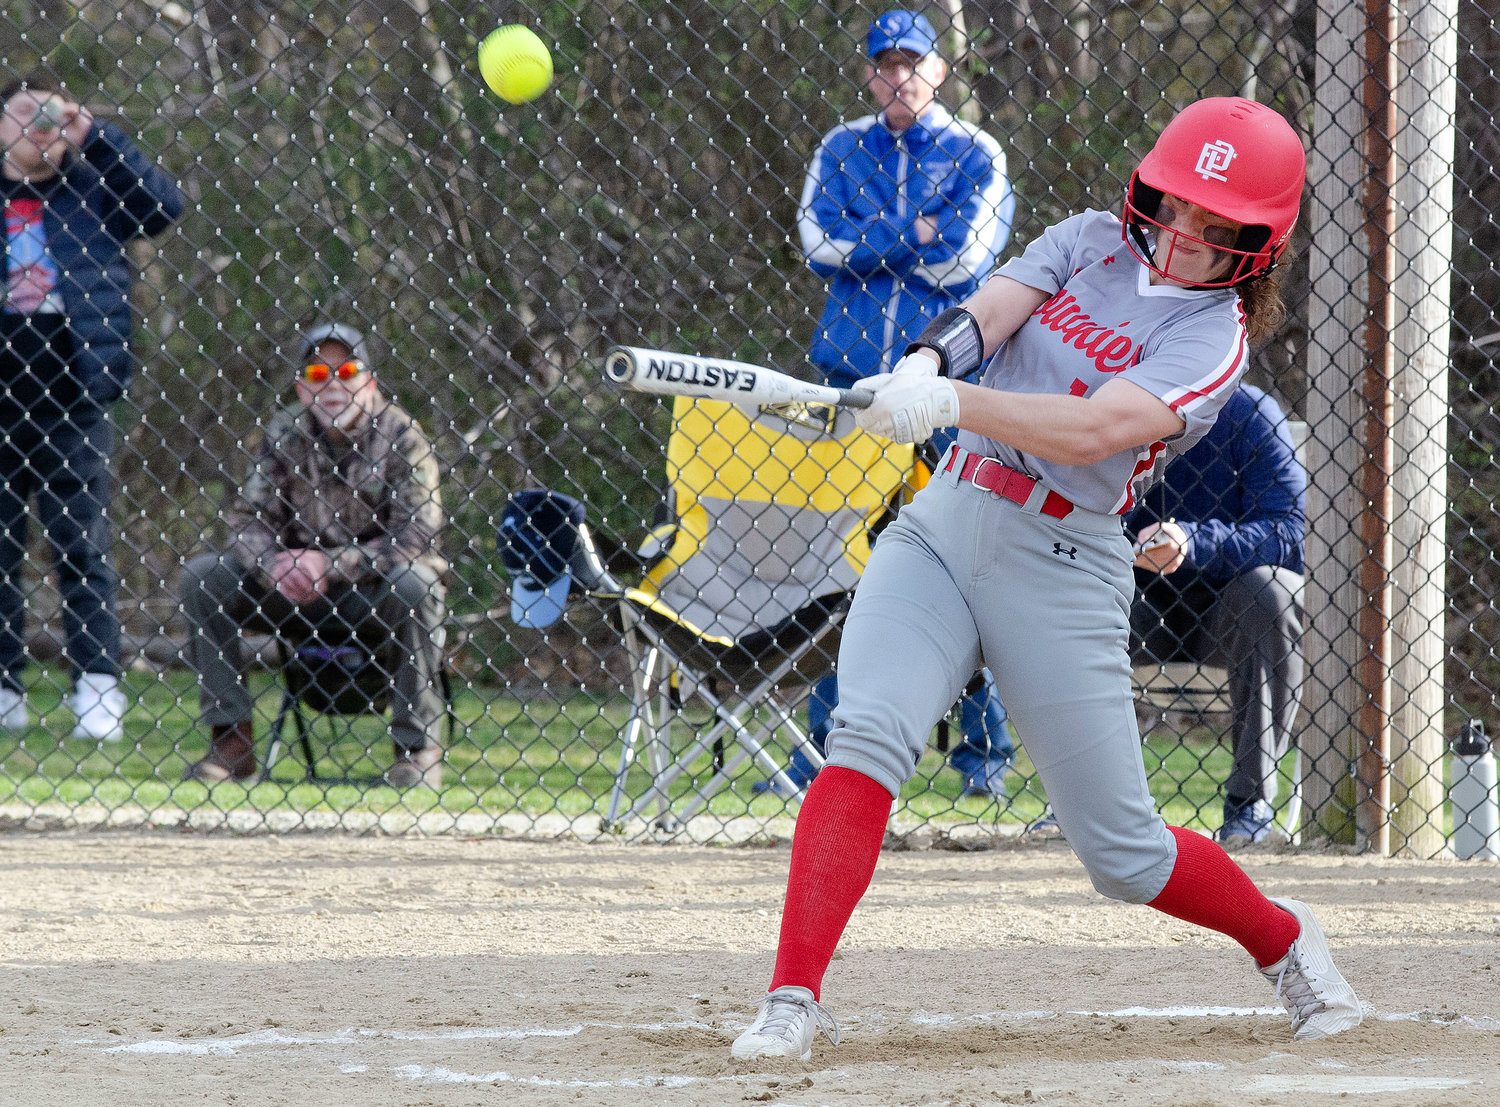 The Townies’ Sophie Patterson rips a base hit against the Spartans.